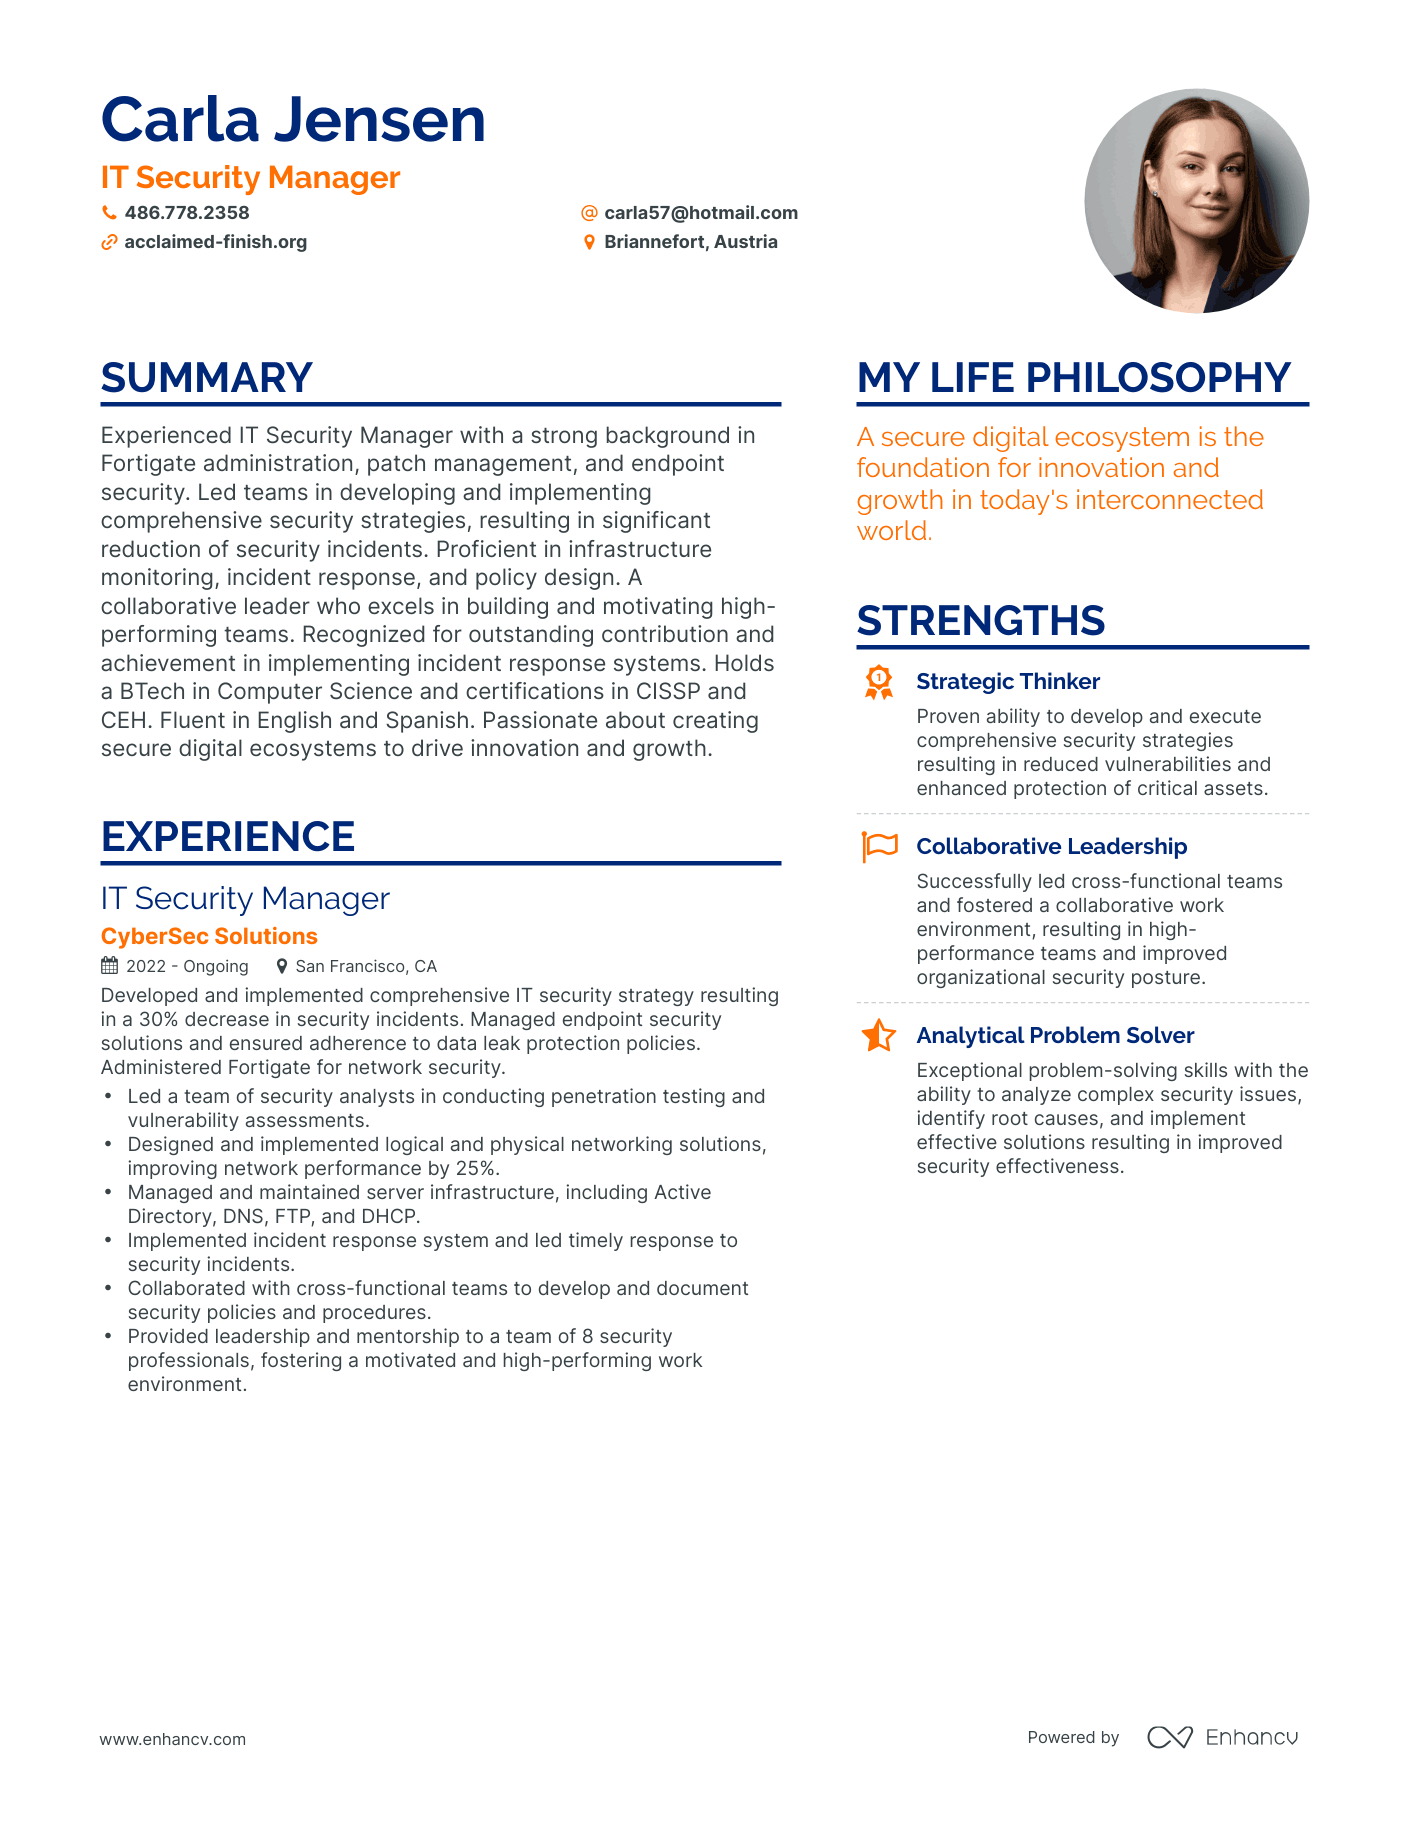 IT Security Manager resume example